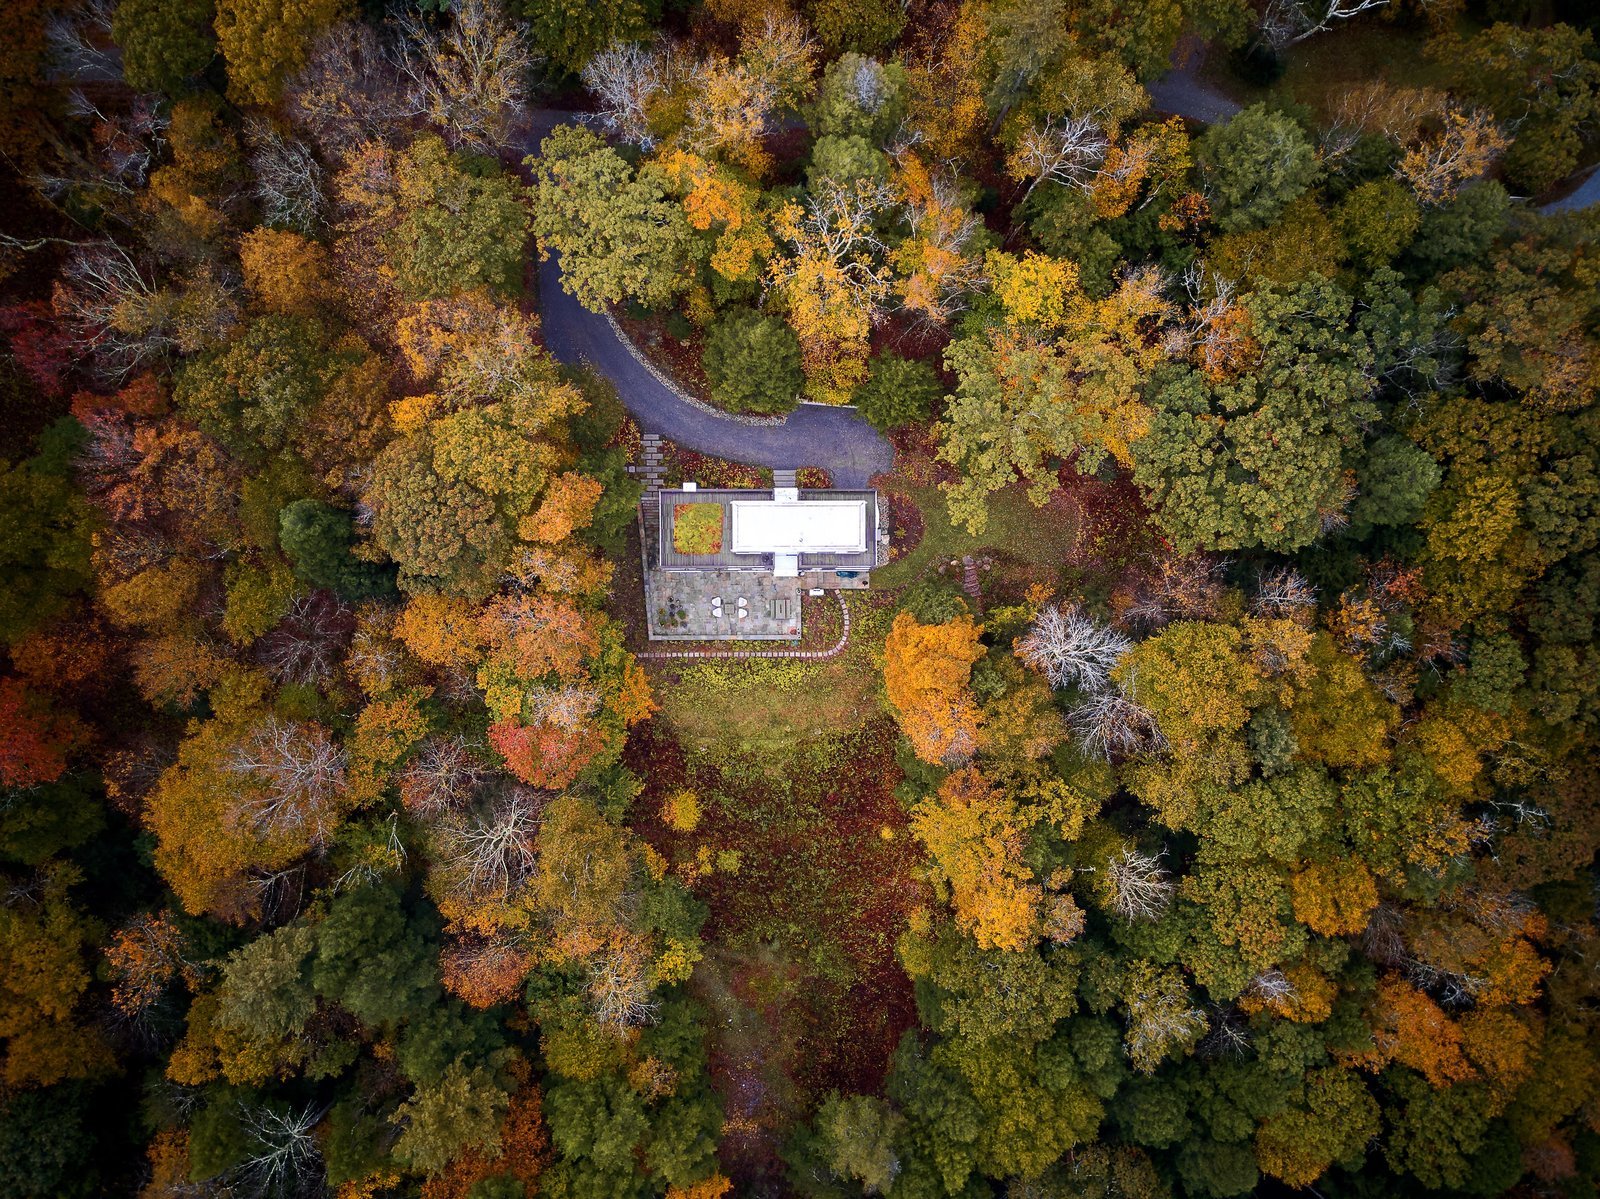   The 4,368-square-foot residence lies in the isolated town of Mount Washington, Massachusetts.  